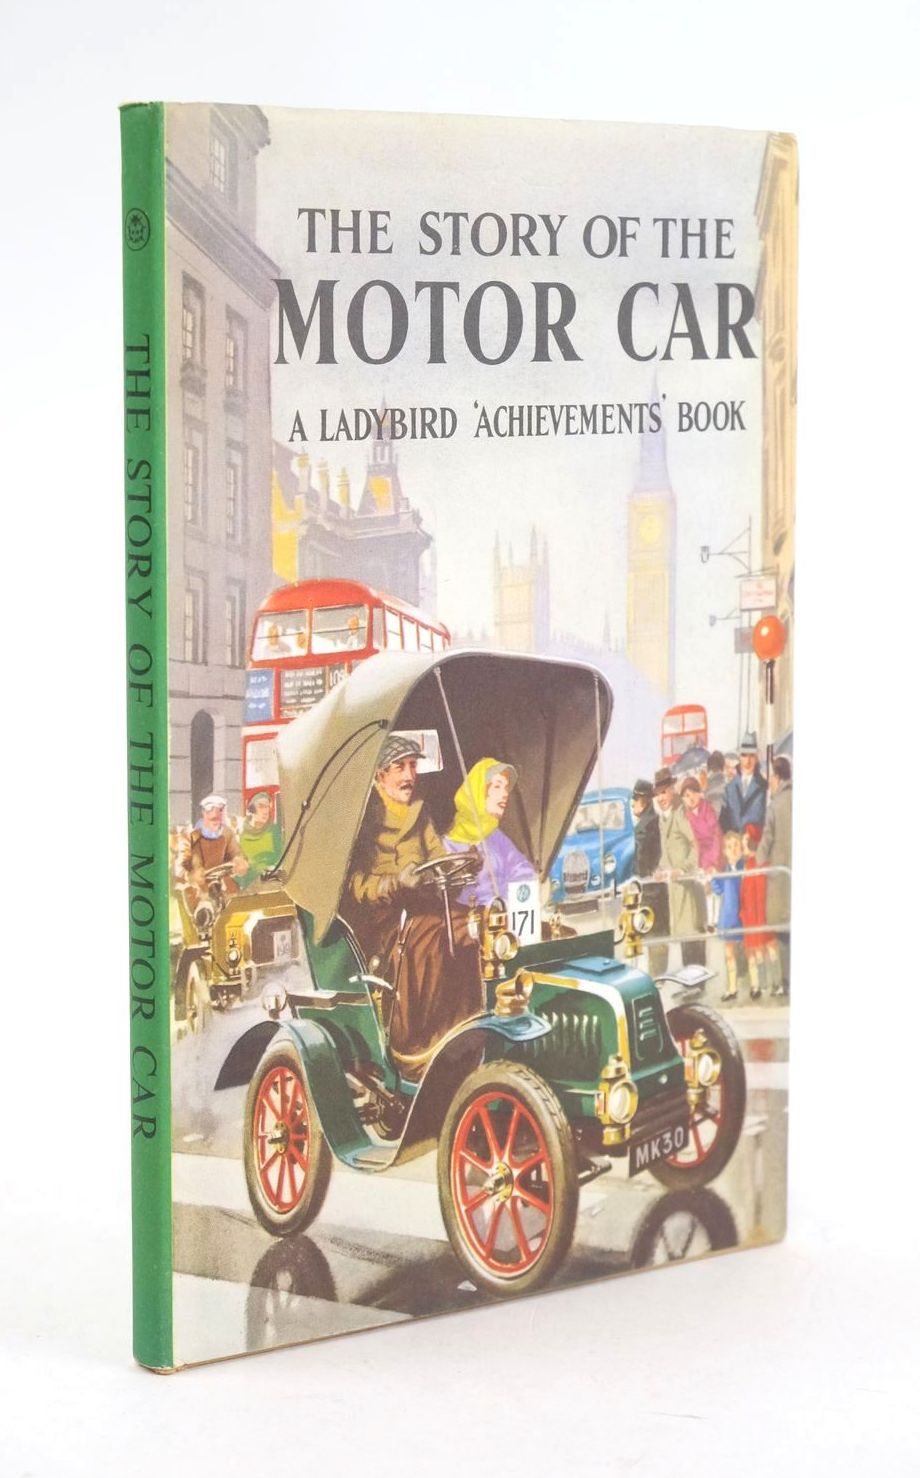 Photo of THE STORY OF THE MOTOR CAR written by Carey, David illustrated by Ayton, Robert published by Wills & Hepworth Ltd. (STOCK CODE: 1324669)  for sale by Stella & Rose's Books